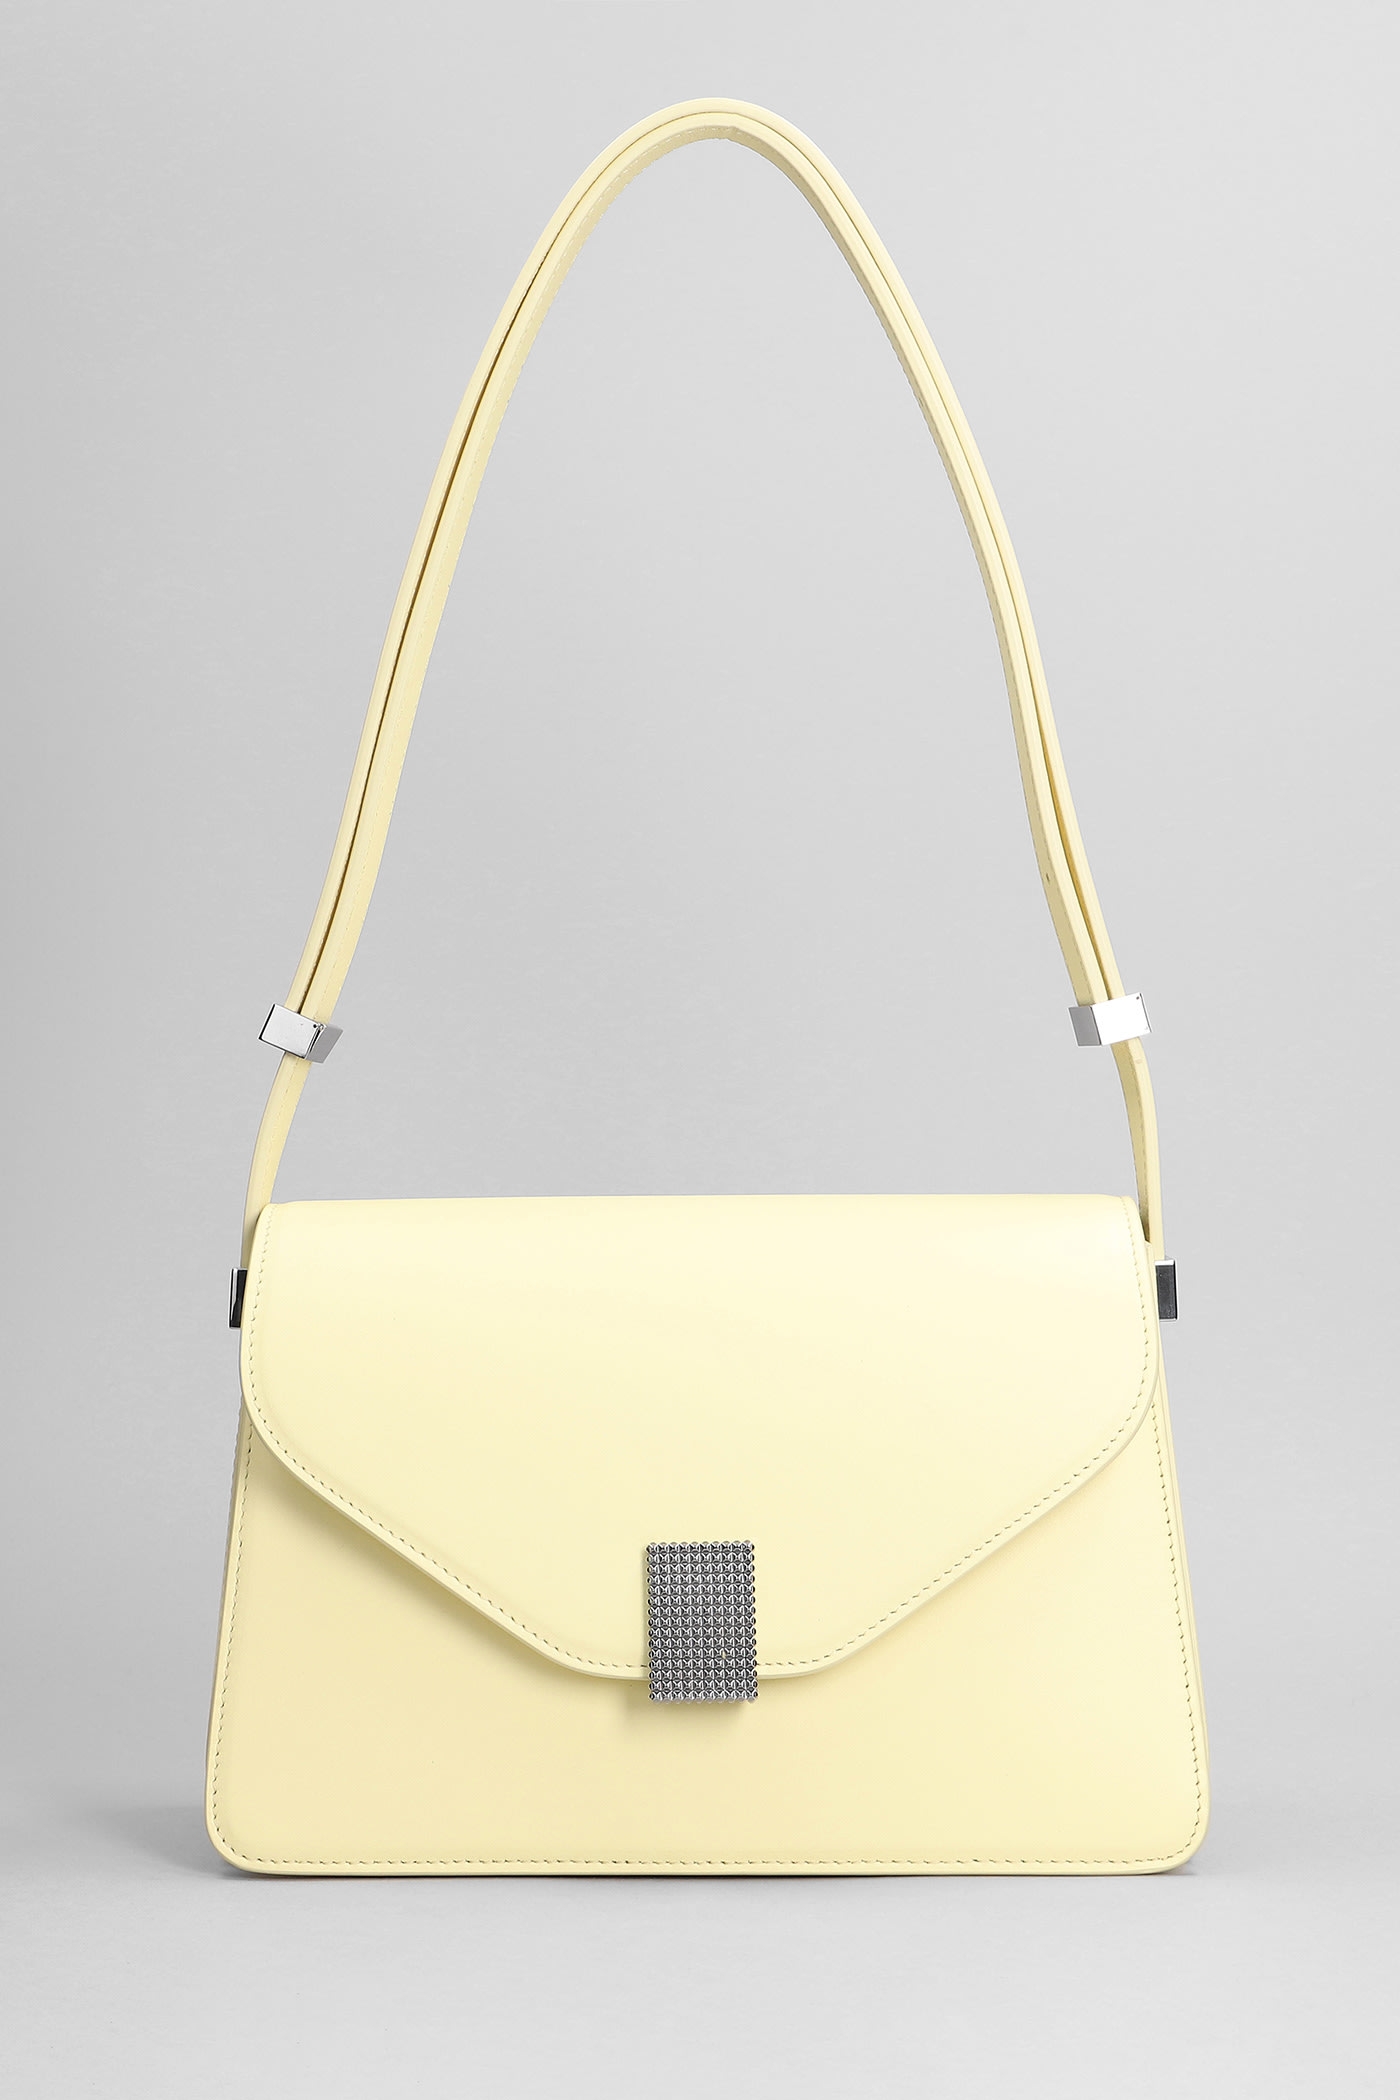 LANVIN SHOULDER BAG IN YELLOW LEATHER